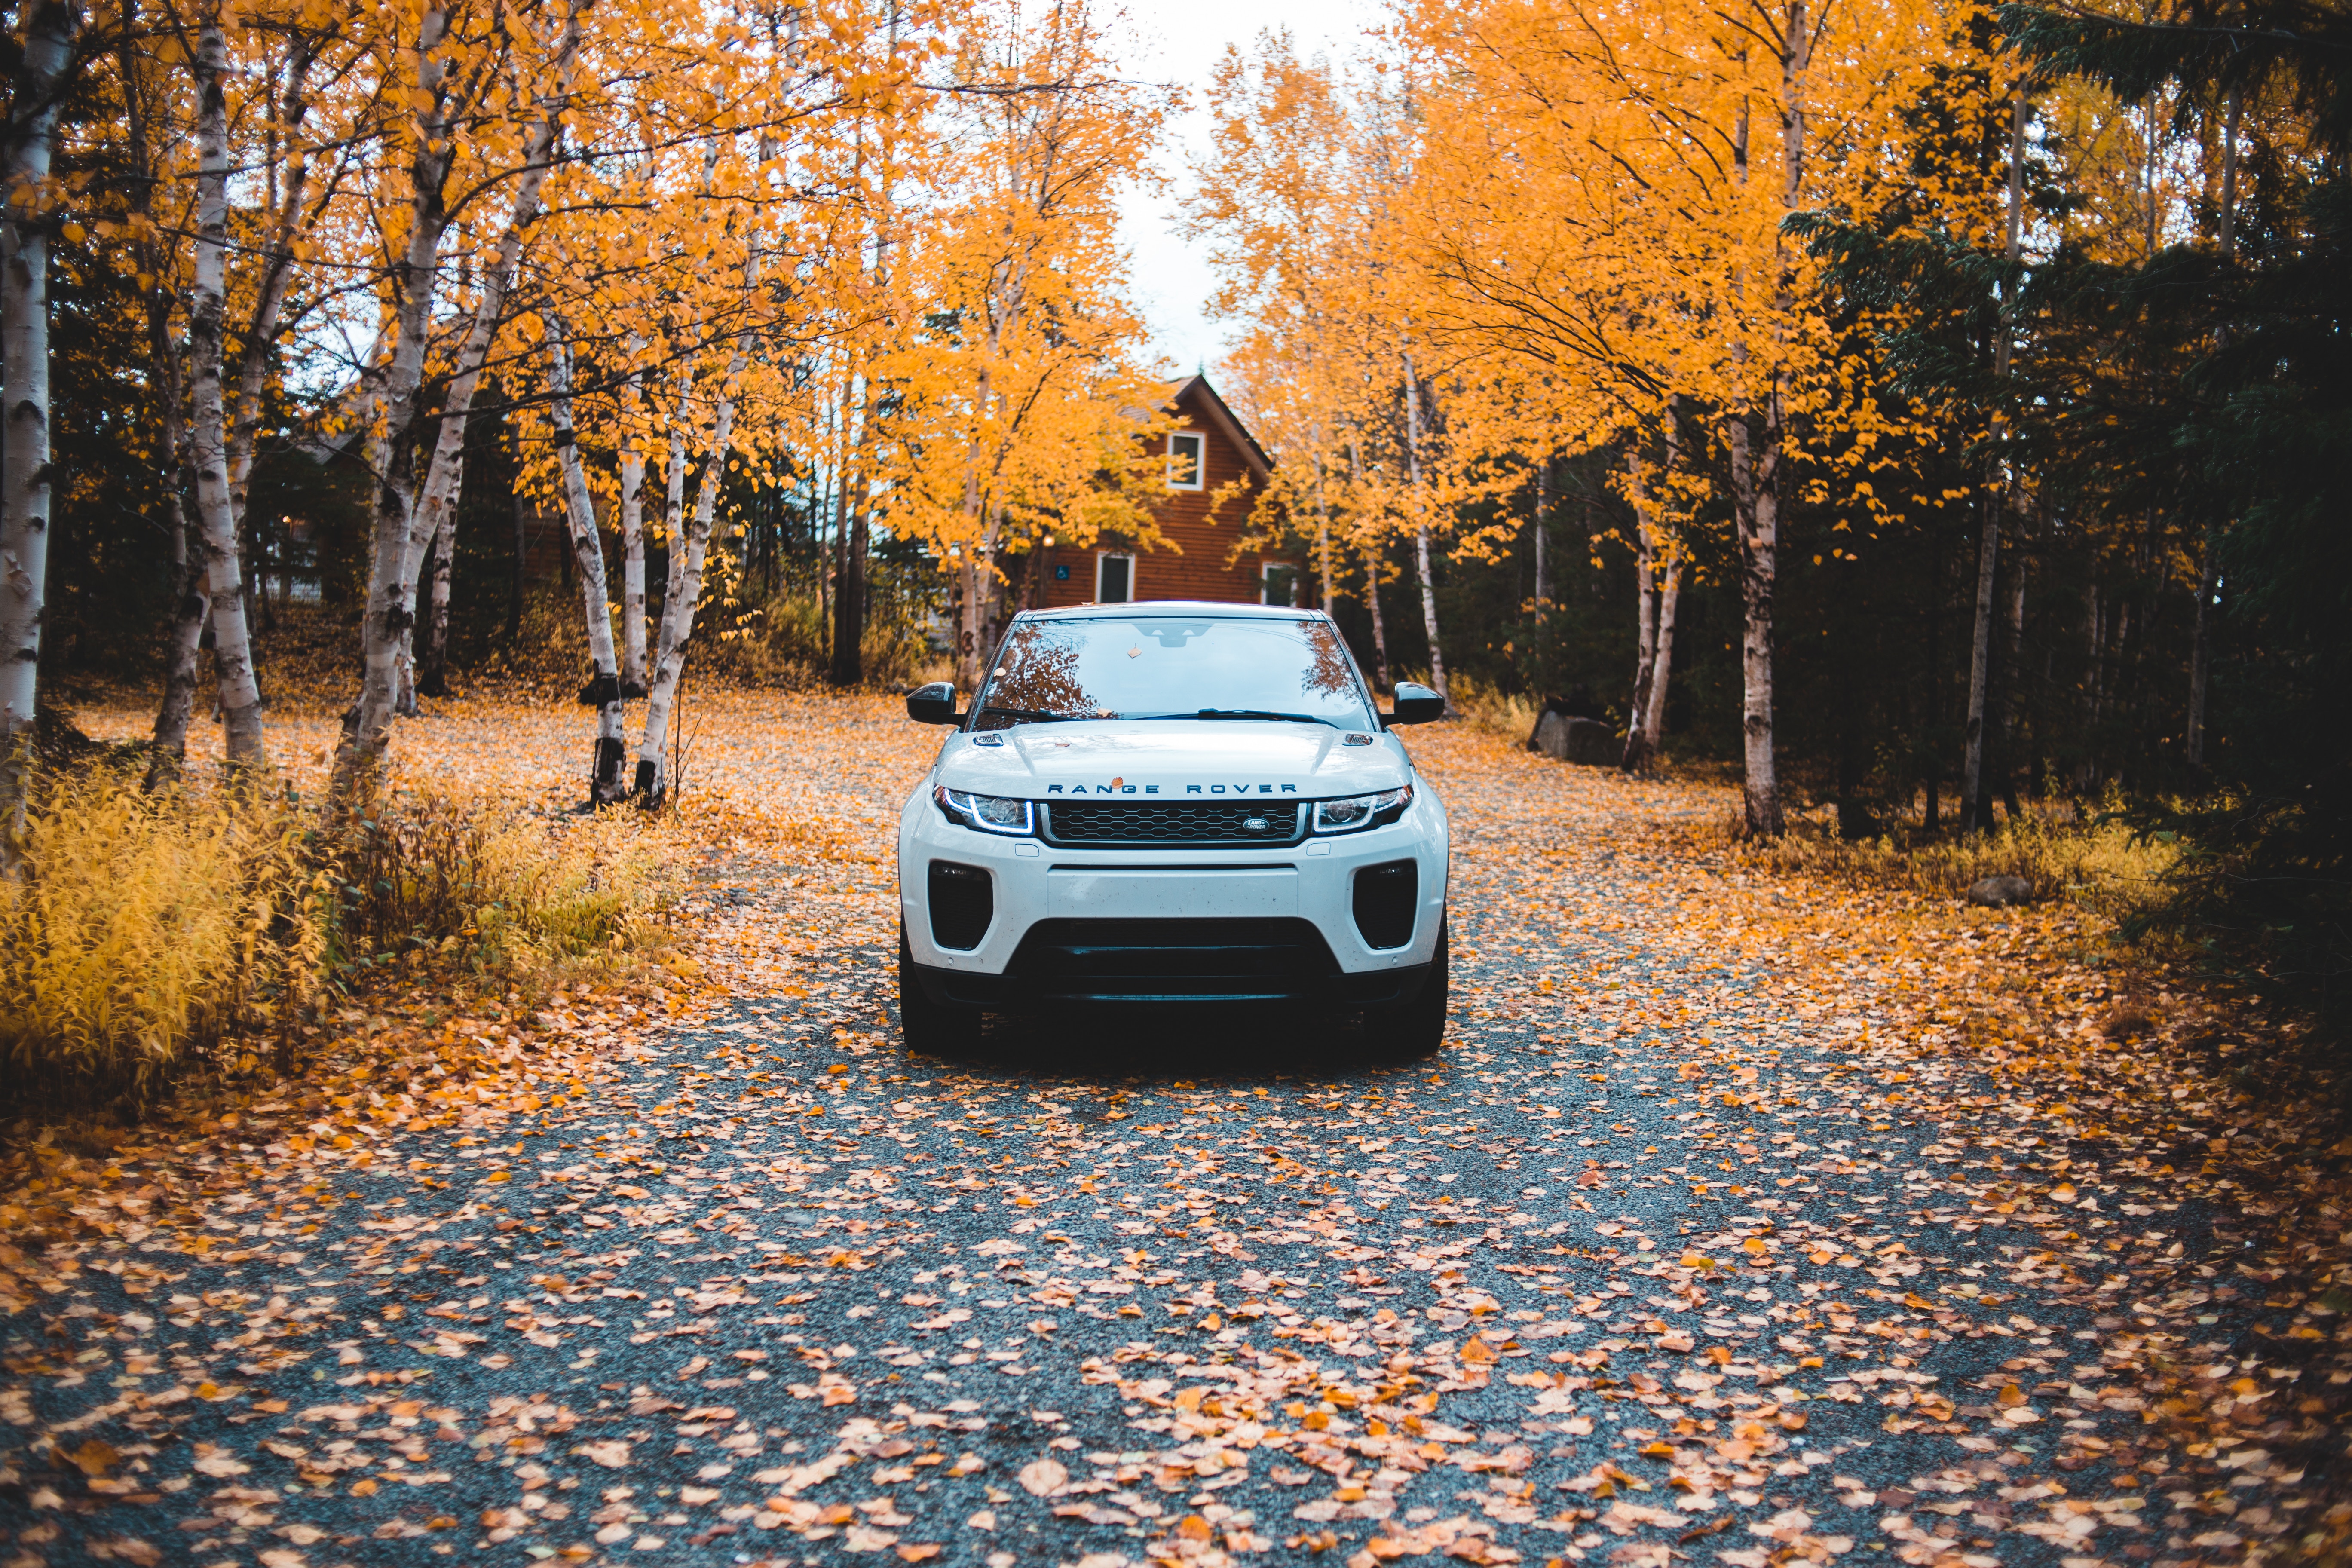 range rover, cars, land rover, front view, autumn, suv